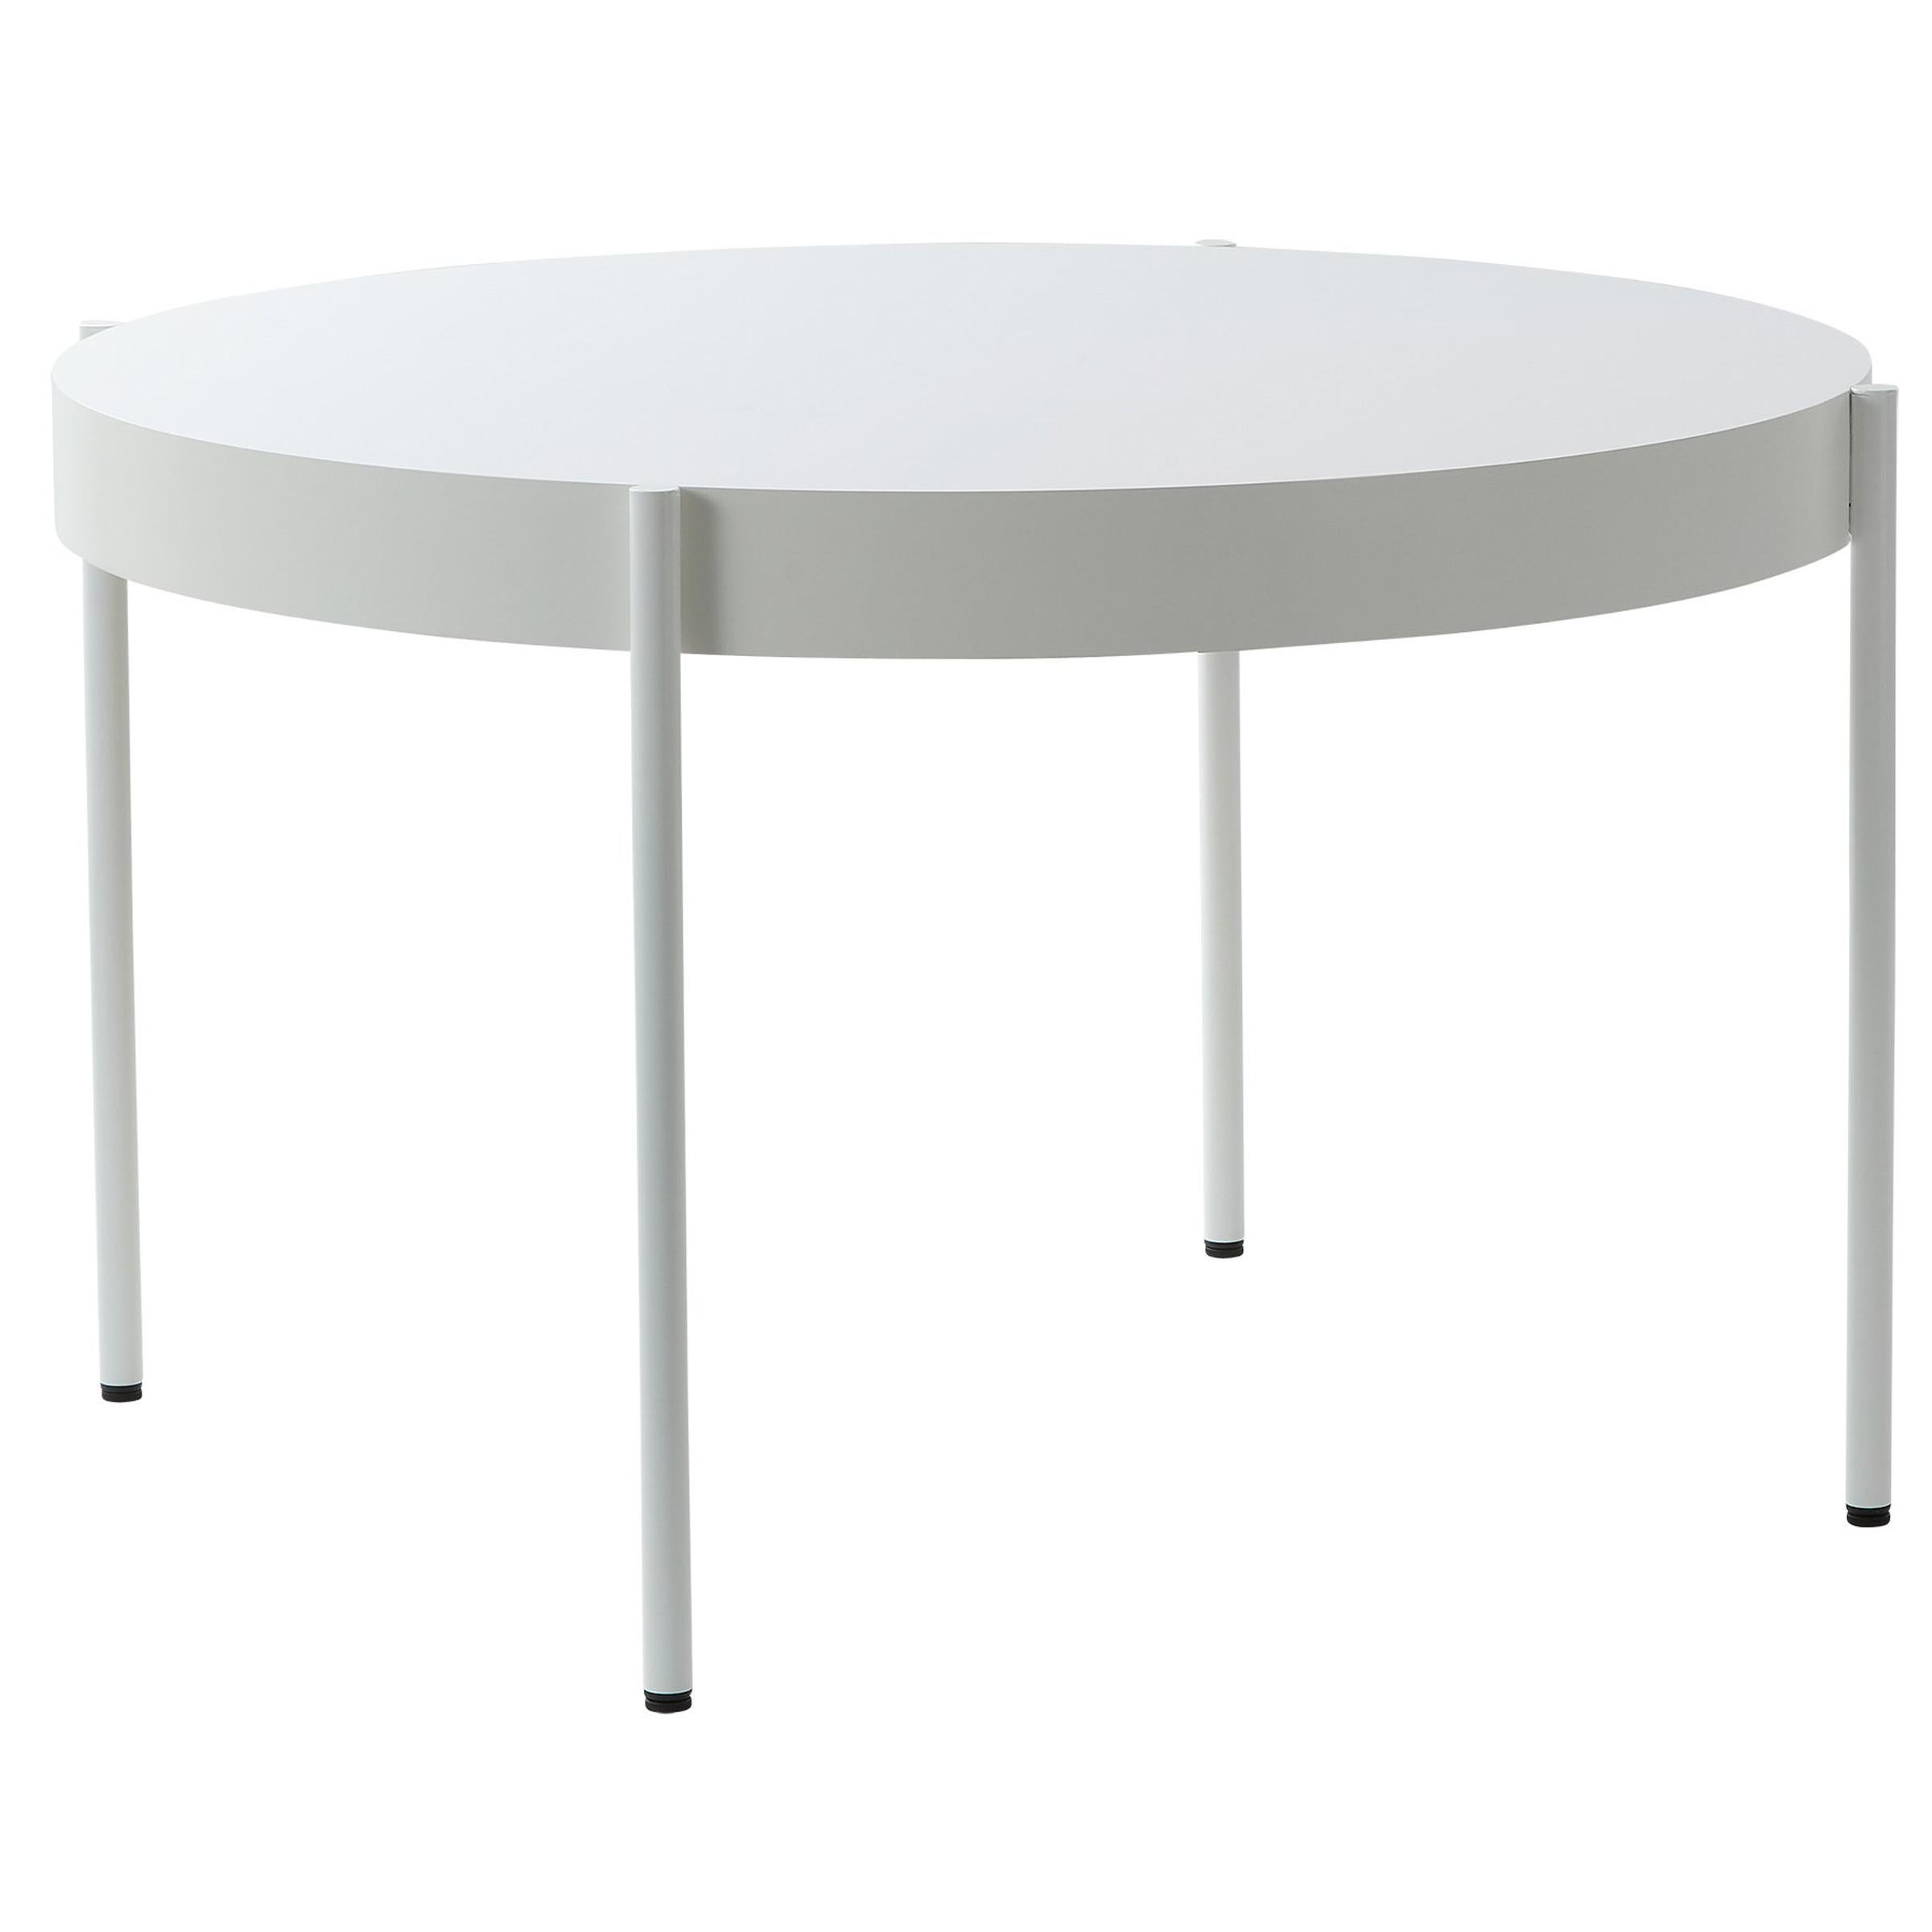 Series 430 Small Round Dining Table in White by Verner Panton For Sale